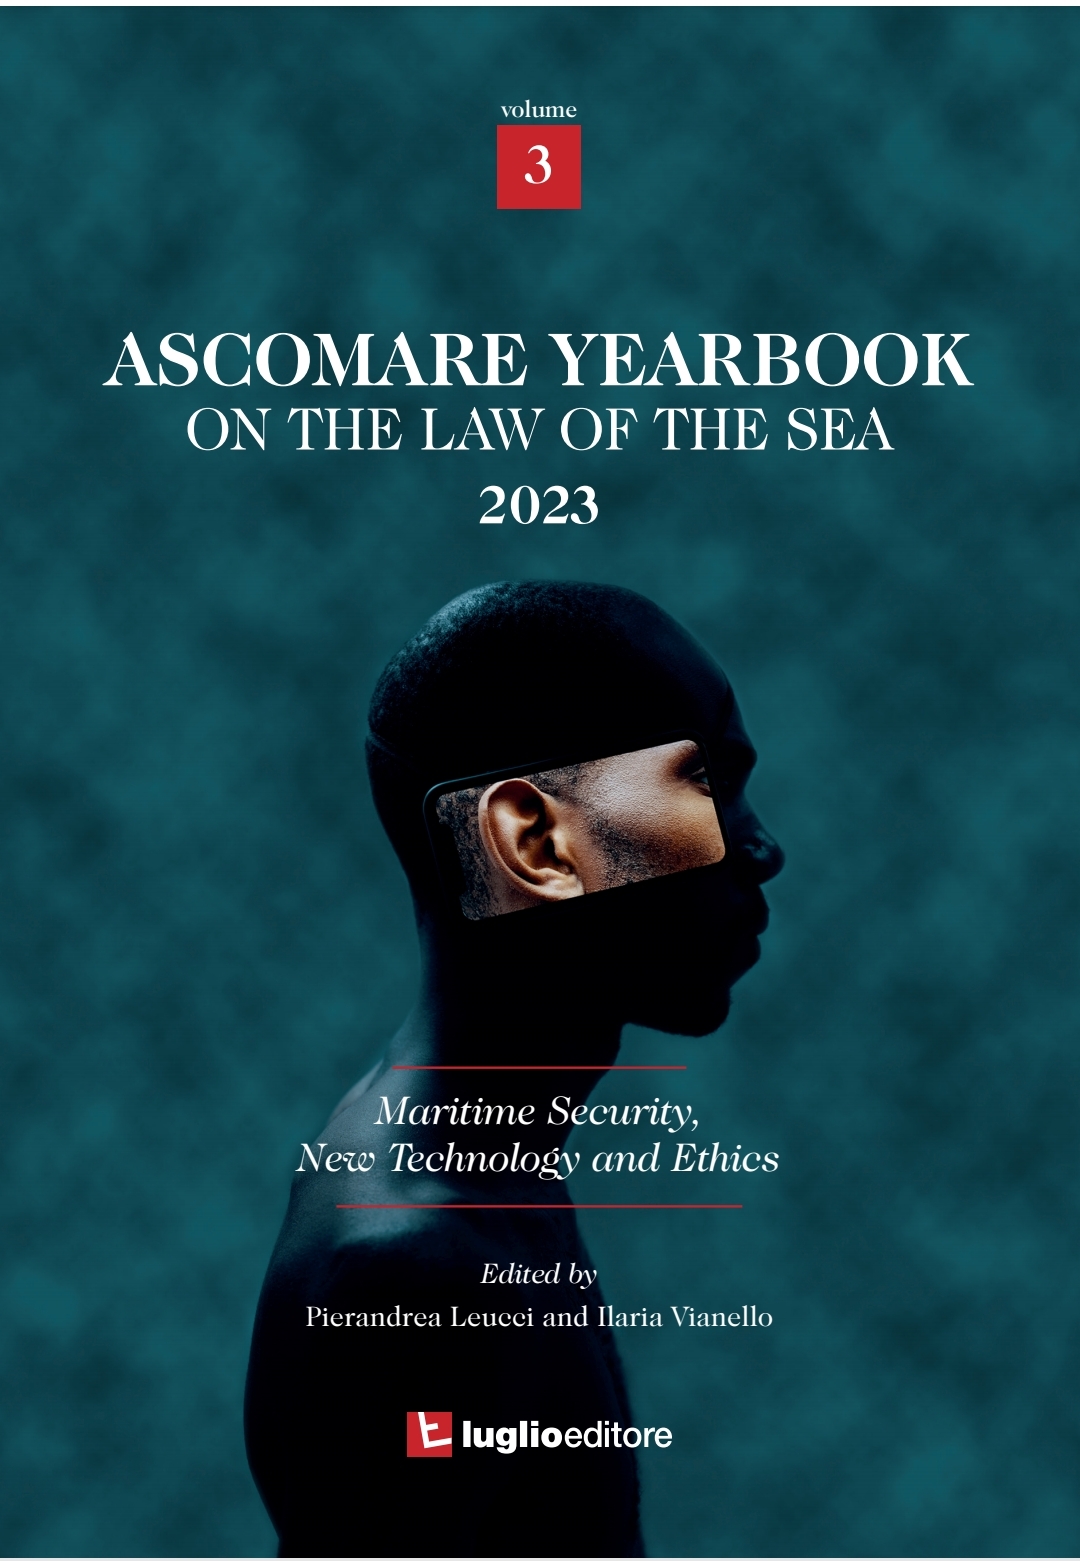  ASCOMARE Yearbook on the Law of the Sea 2023